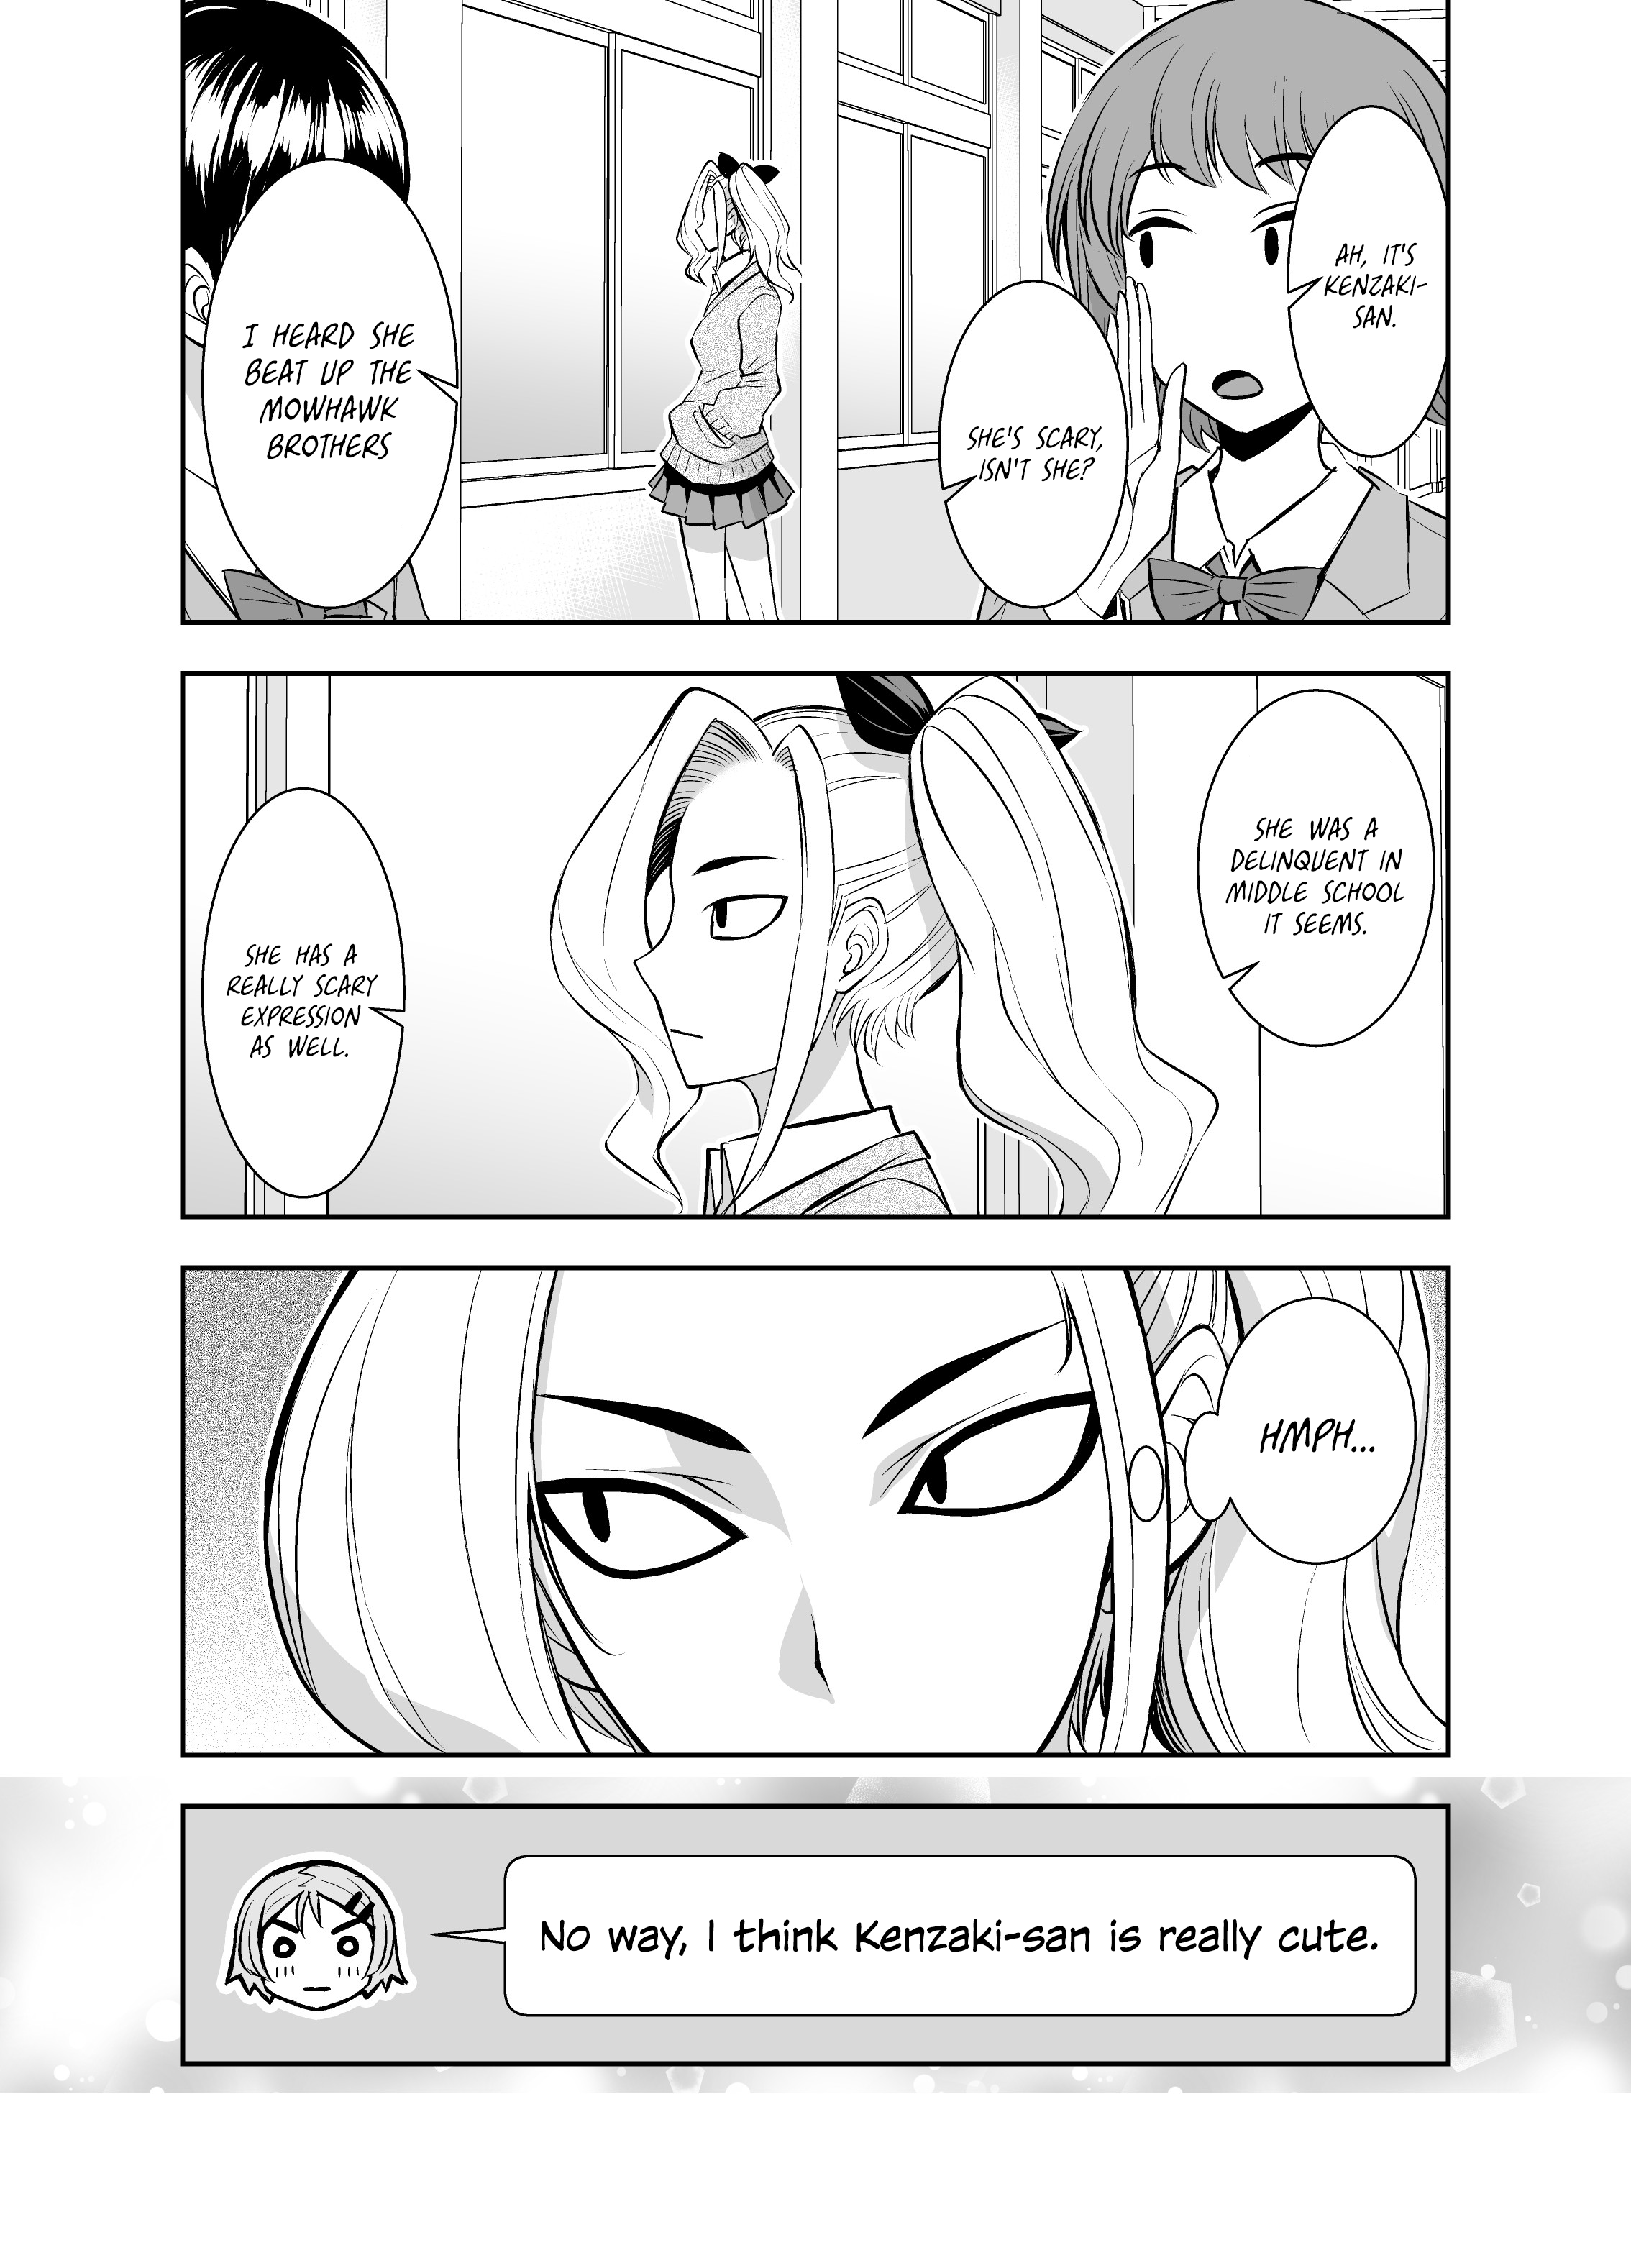 A Cute Guy - Page 1